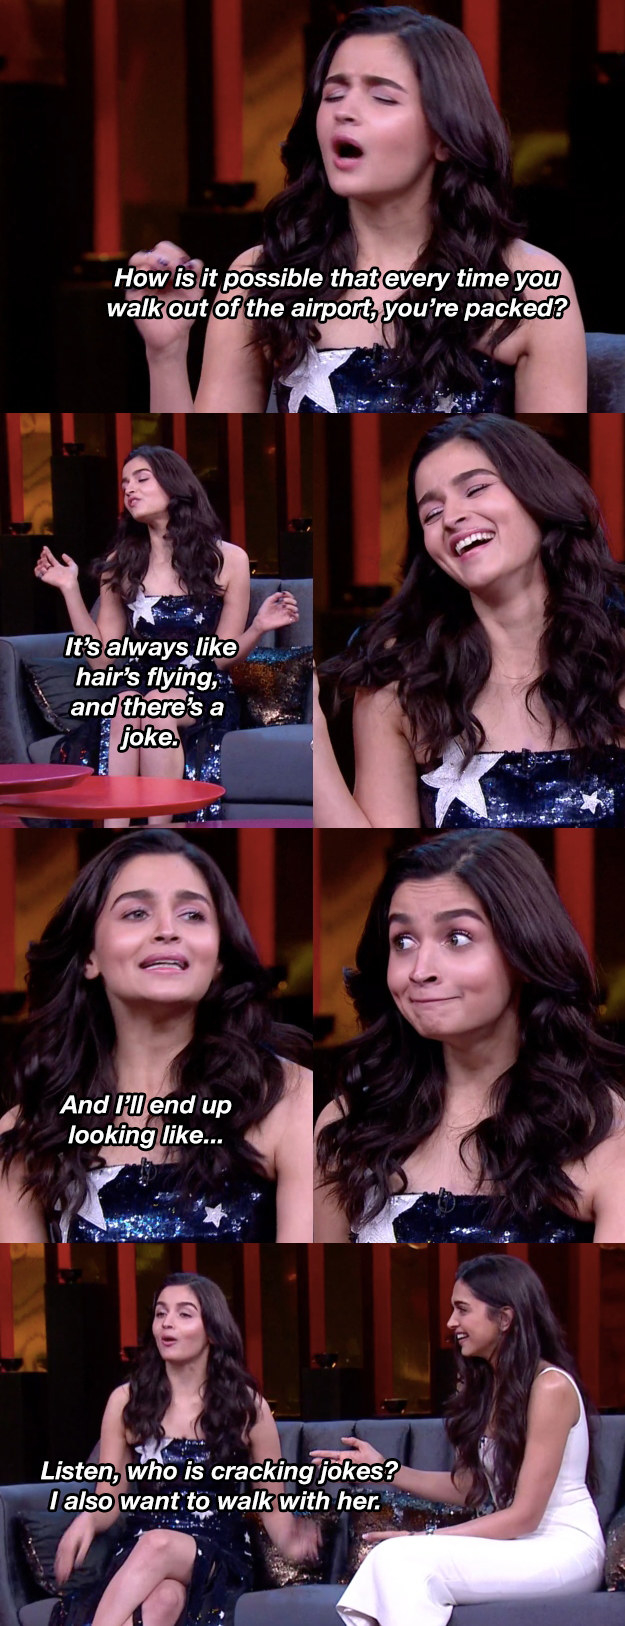 18 Hilariously Awkward Moments From Deepika And Alia's "Koffee With